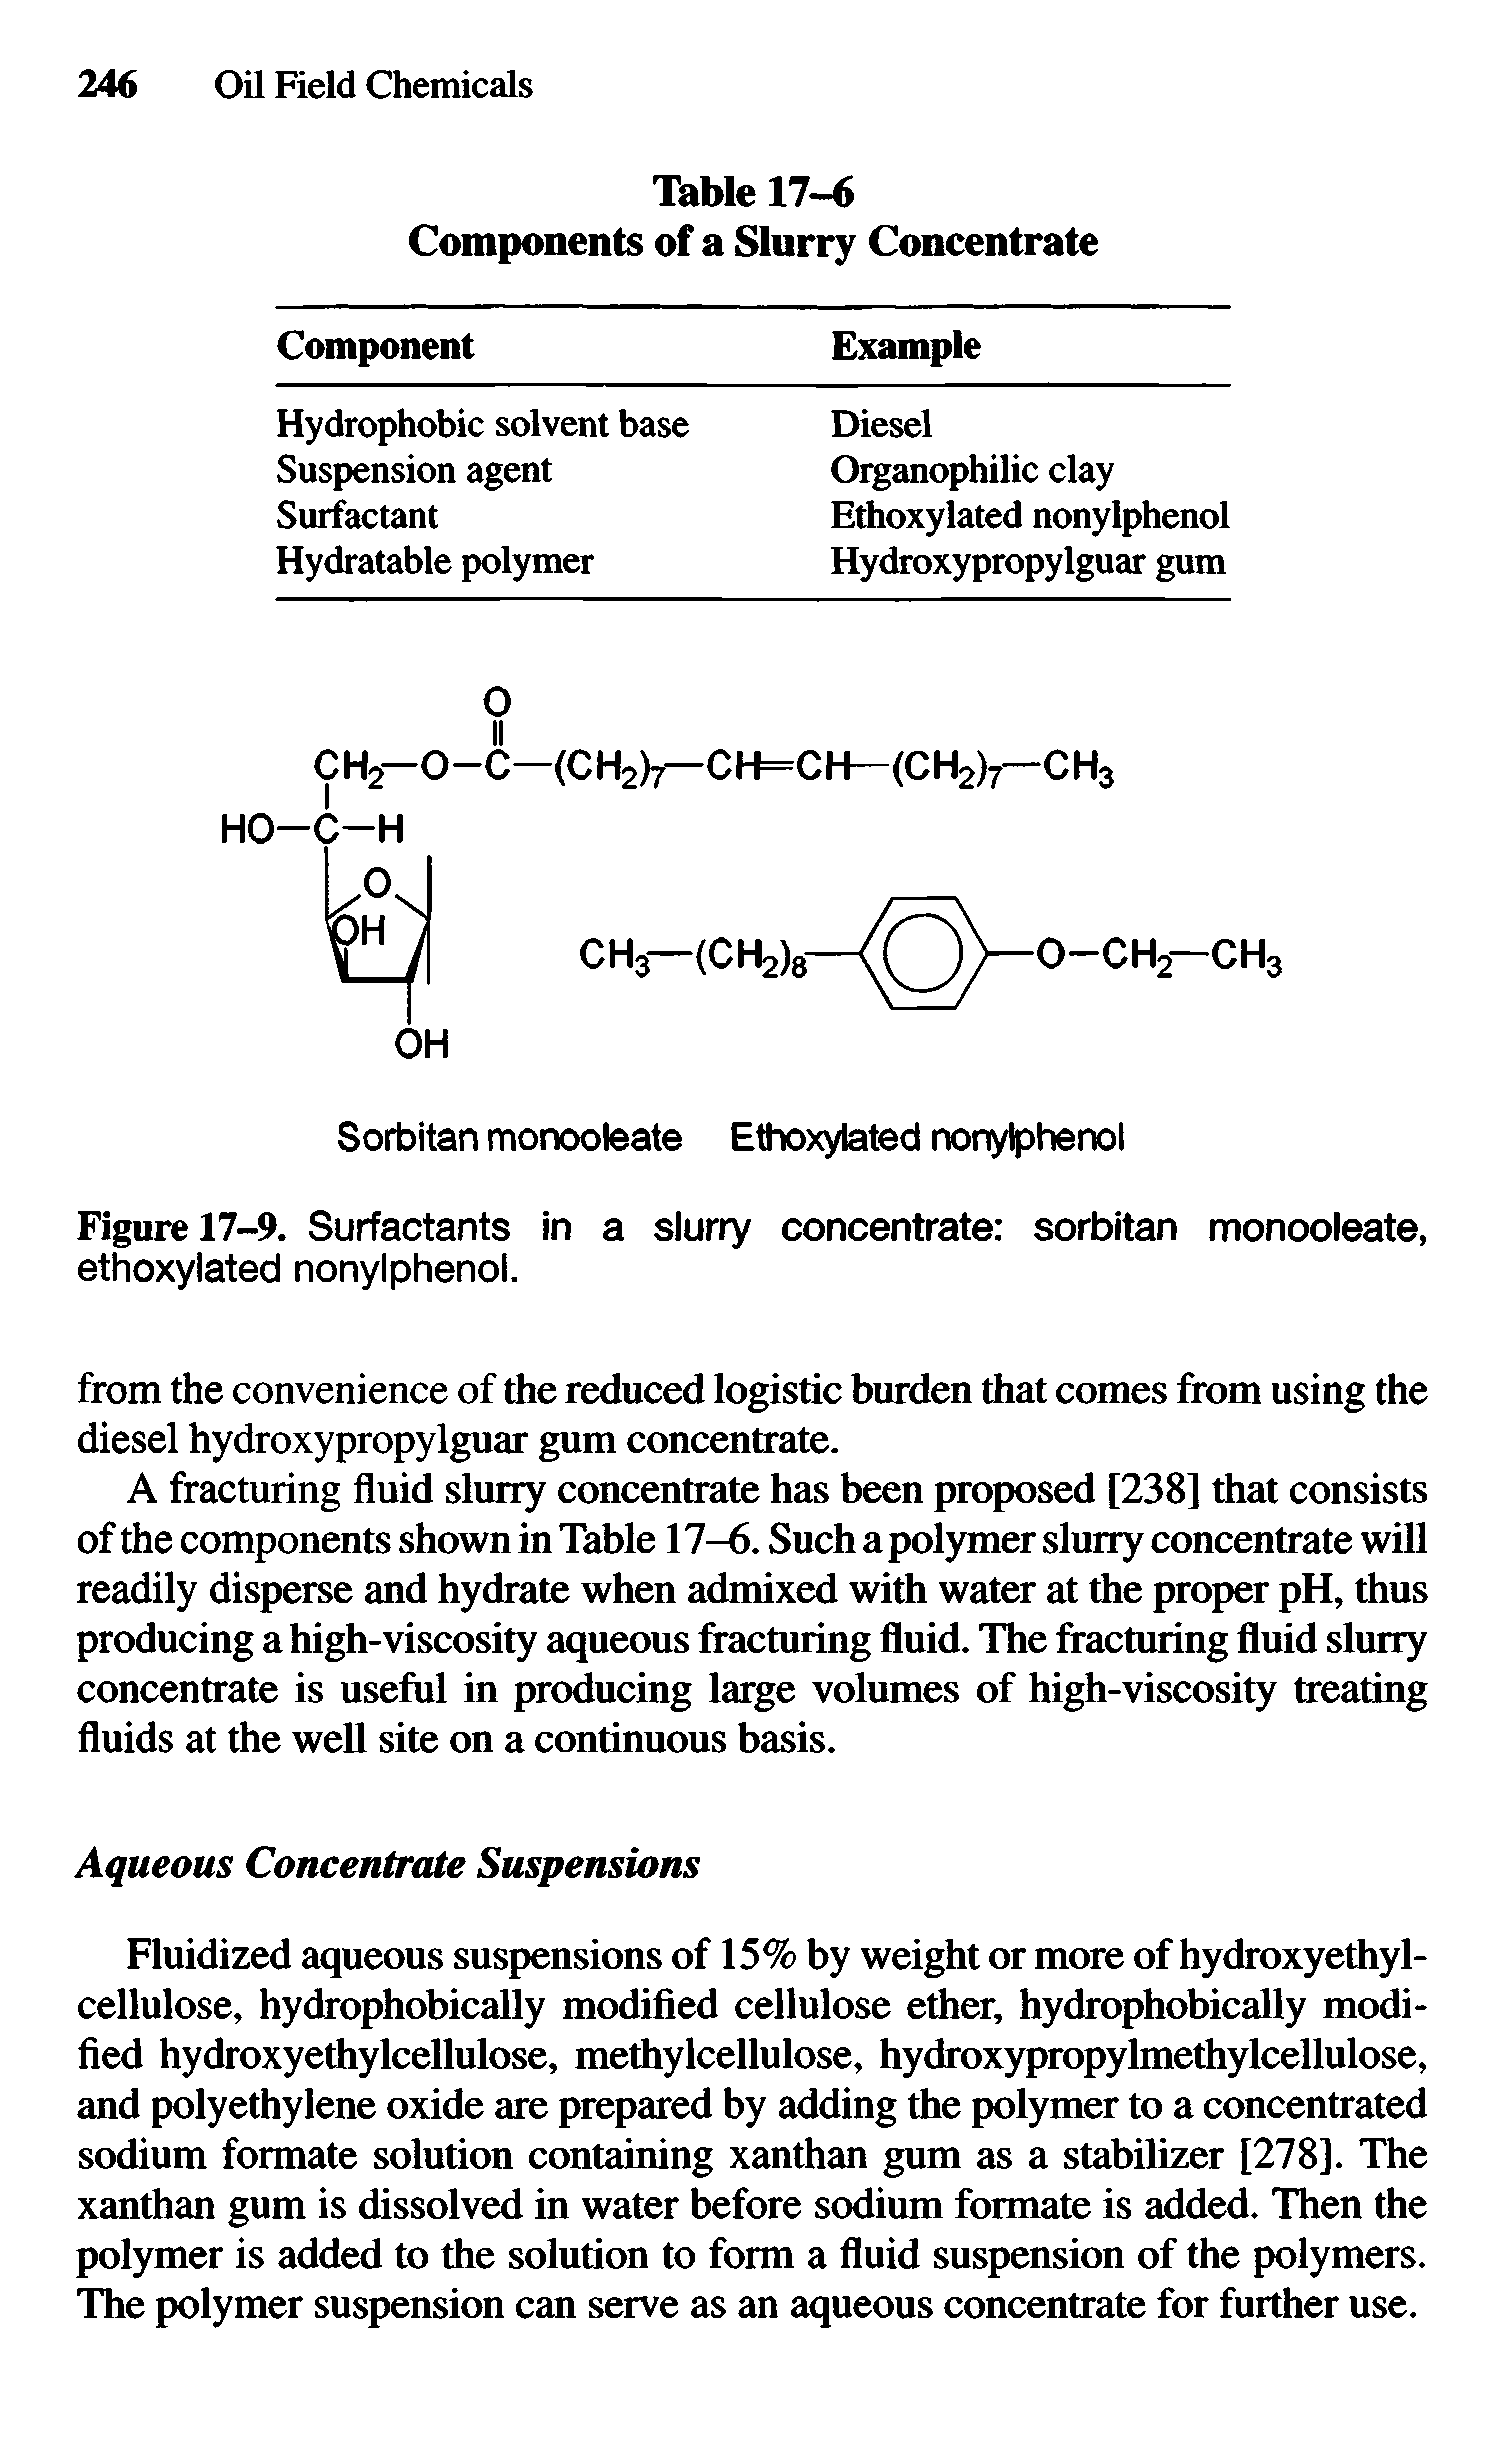 Figure 17-9. Surfactants in a slurry concentrate sorbitan monooleate, ethoxylated nonylphenol.